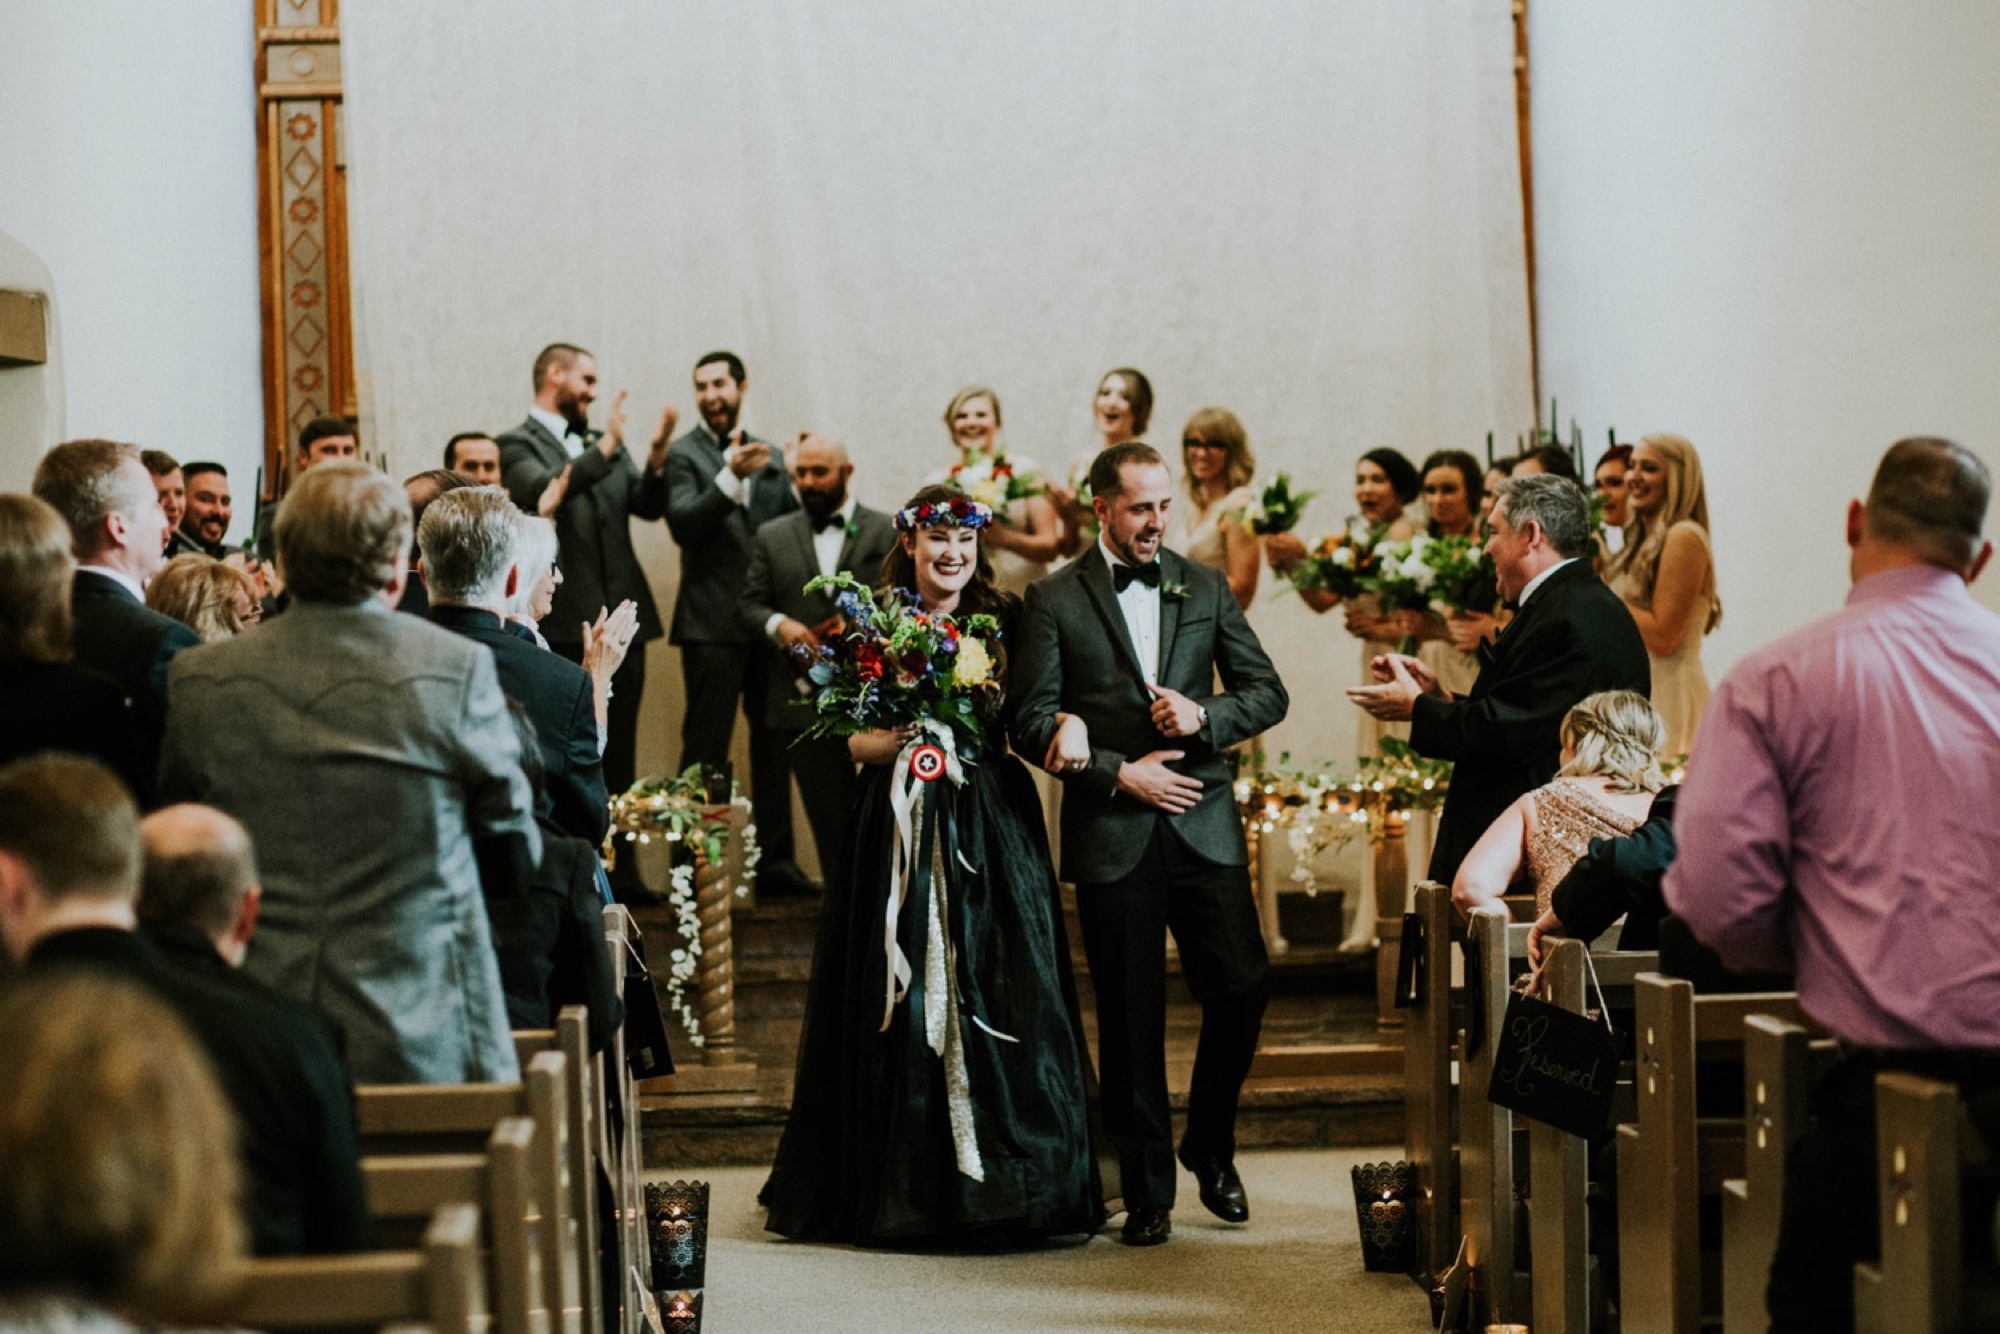  Kymbrye and Chris had the most magical New Years Eve wedding in Albuquerque, New Mexico. Every detail of their fabulous New Years Eve wedding was so beautiful and meaningful. They held their ceremony at the UNM Alumni Memorial Chapel followed by the